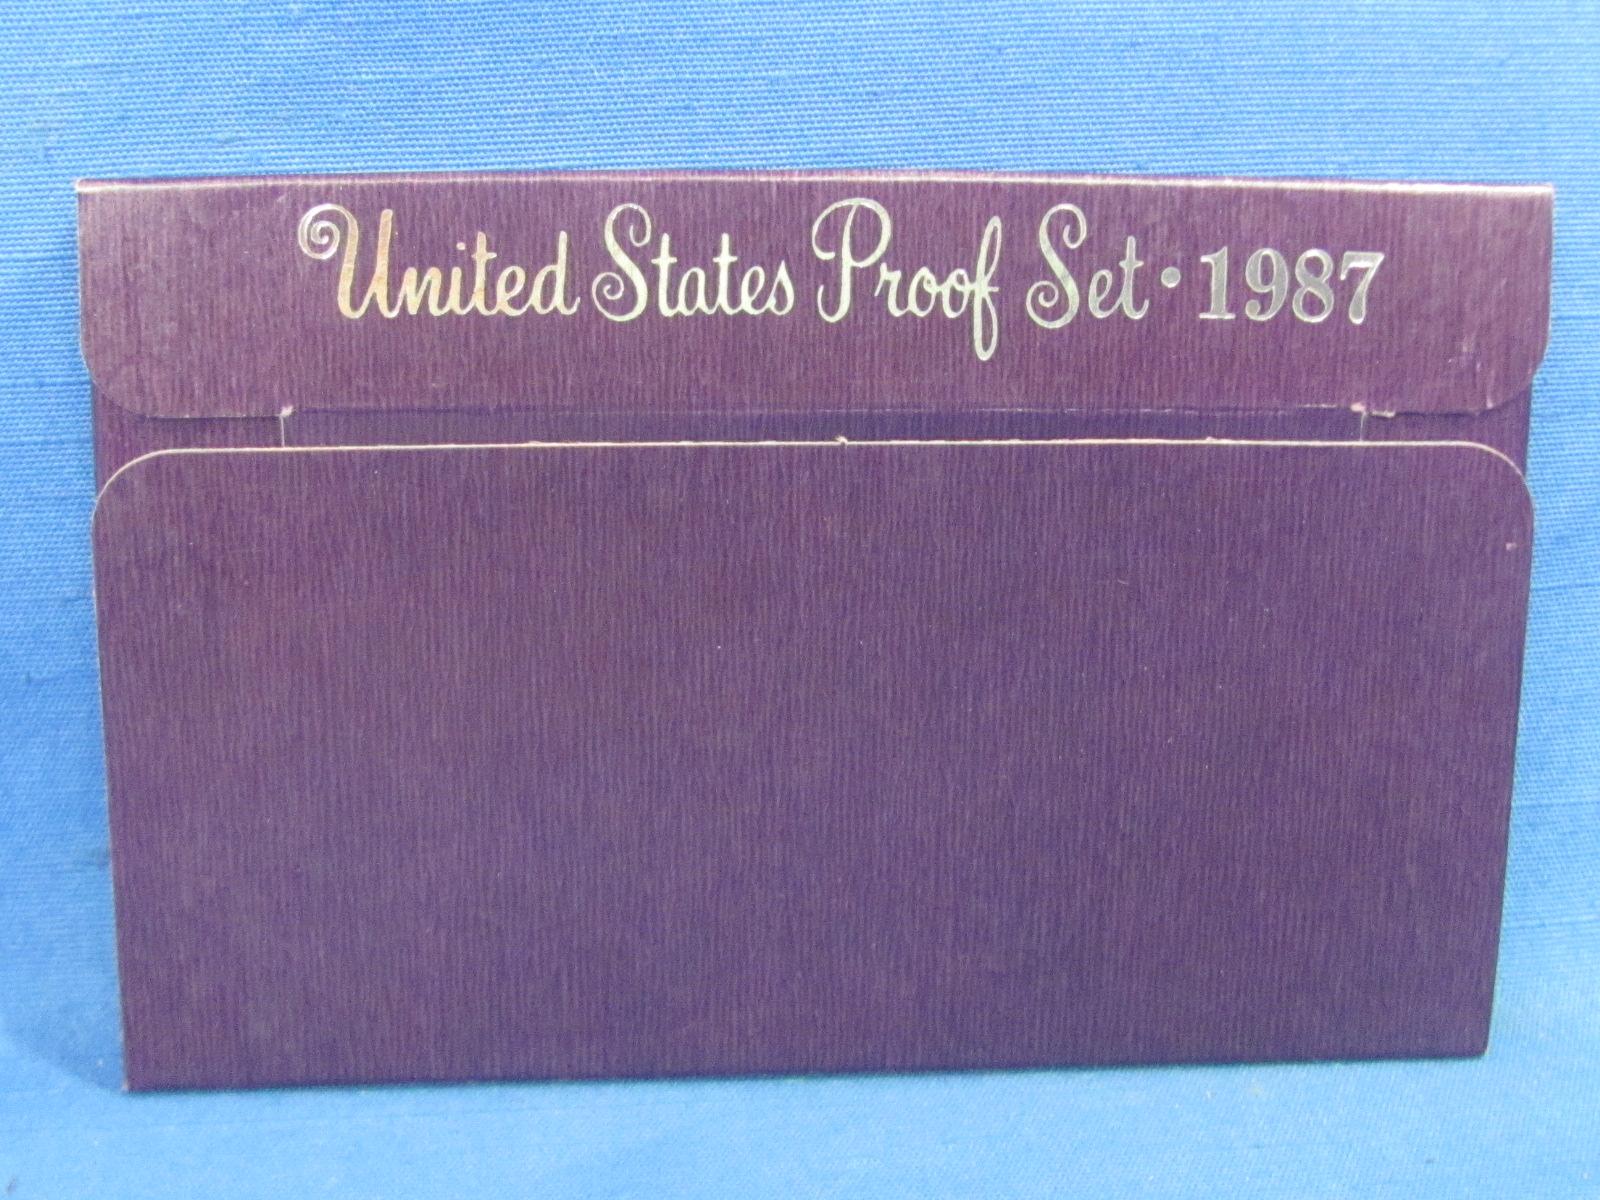 United States Proof Set – 1987 S – in Original Government Packaging